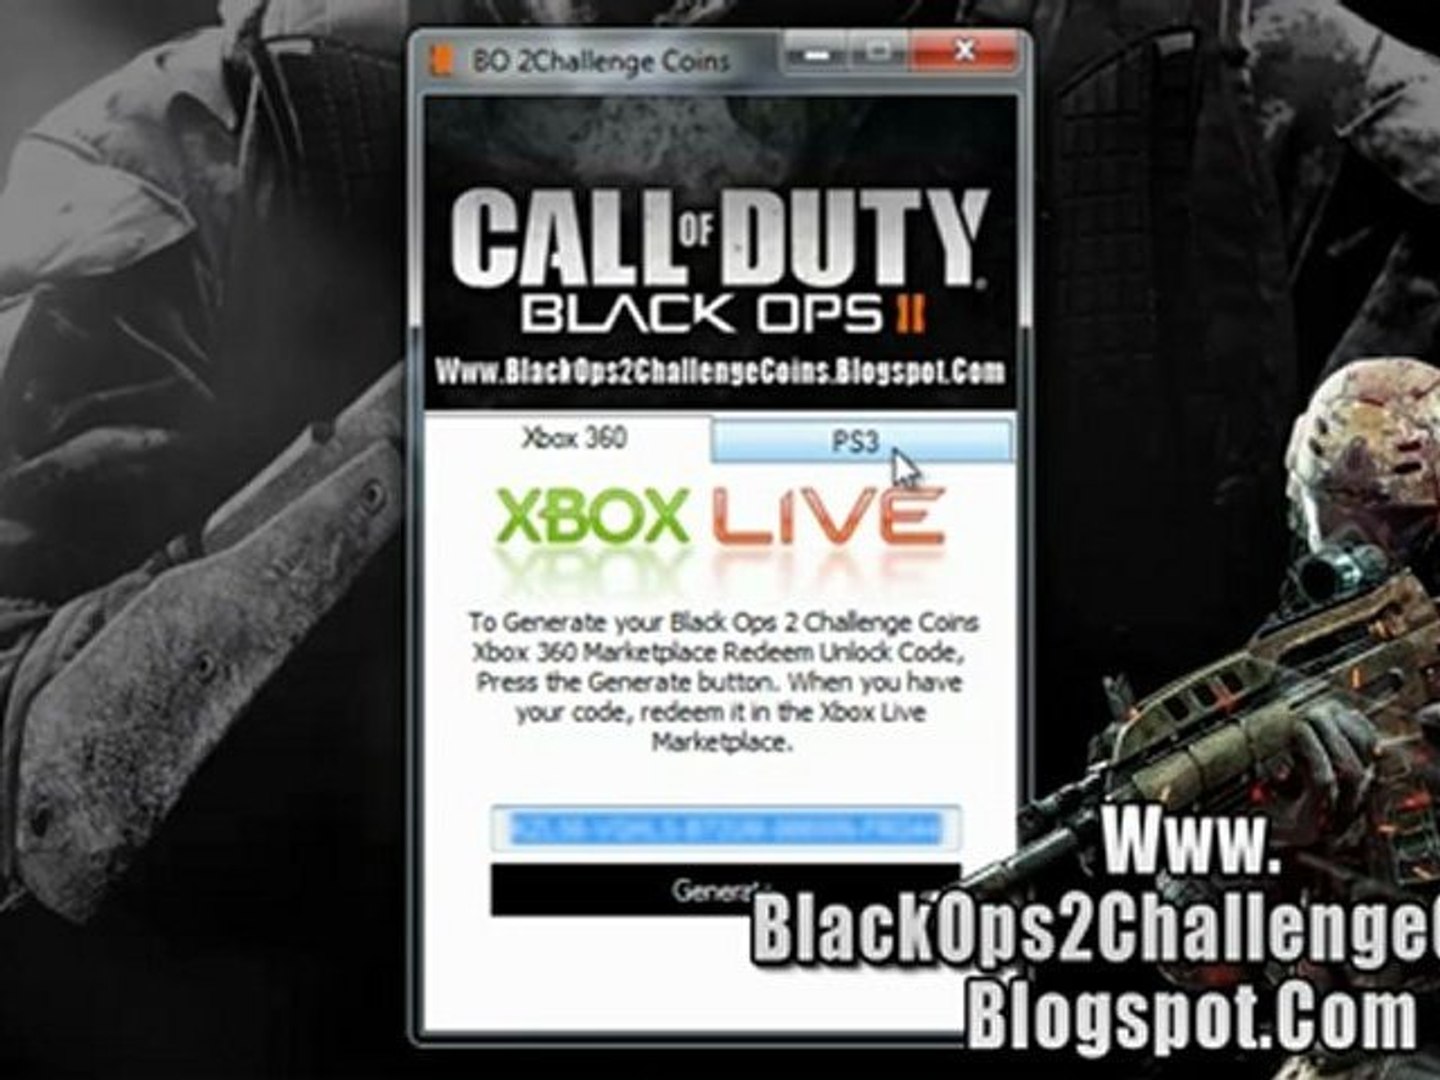 Rose Medicin digtere Get Free Black Ops 2 Challenge Coins Redeem Code - Xbox 360 - PS3 - video  Dailymotion